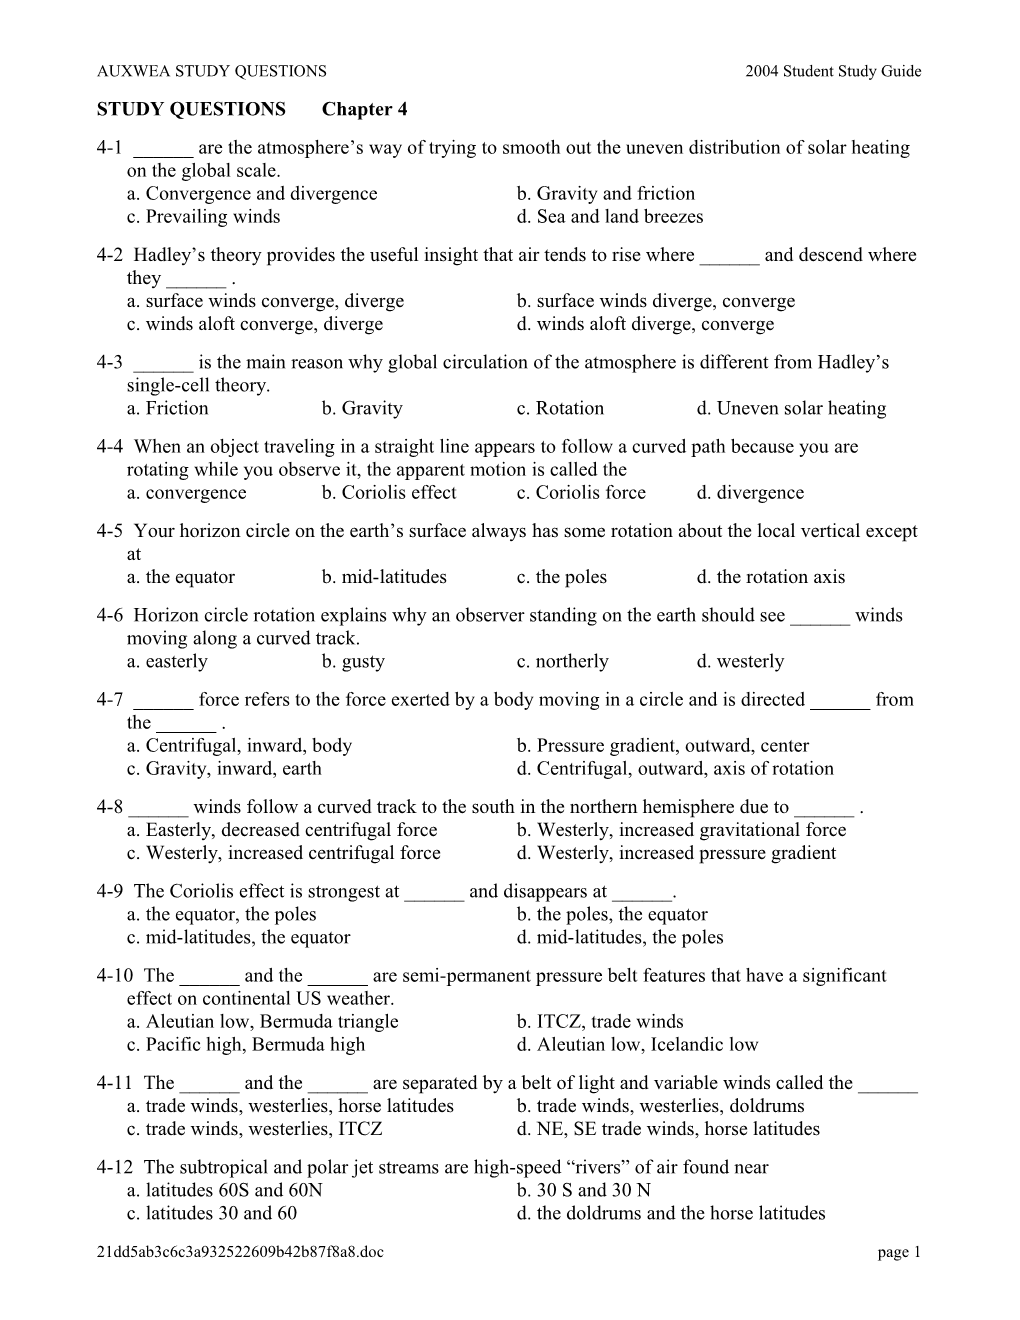 AUXWEA STUDY QUESTIONS 2004 Student Study Guide